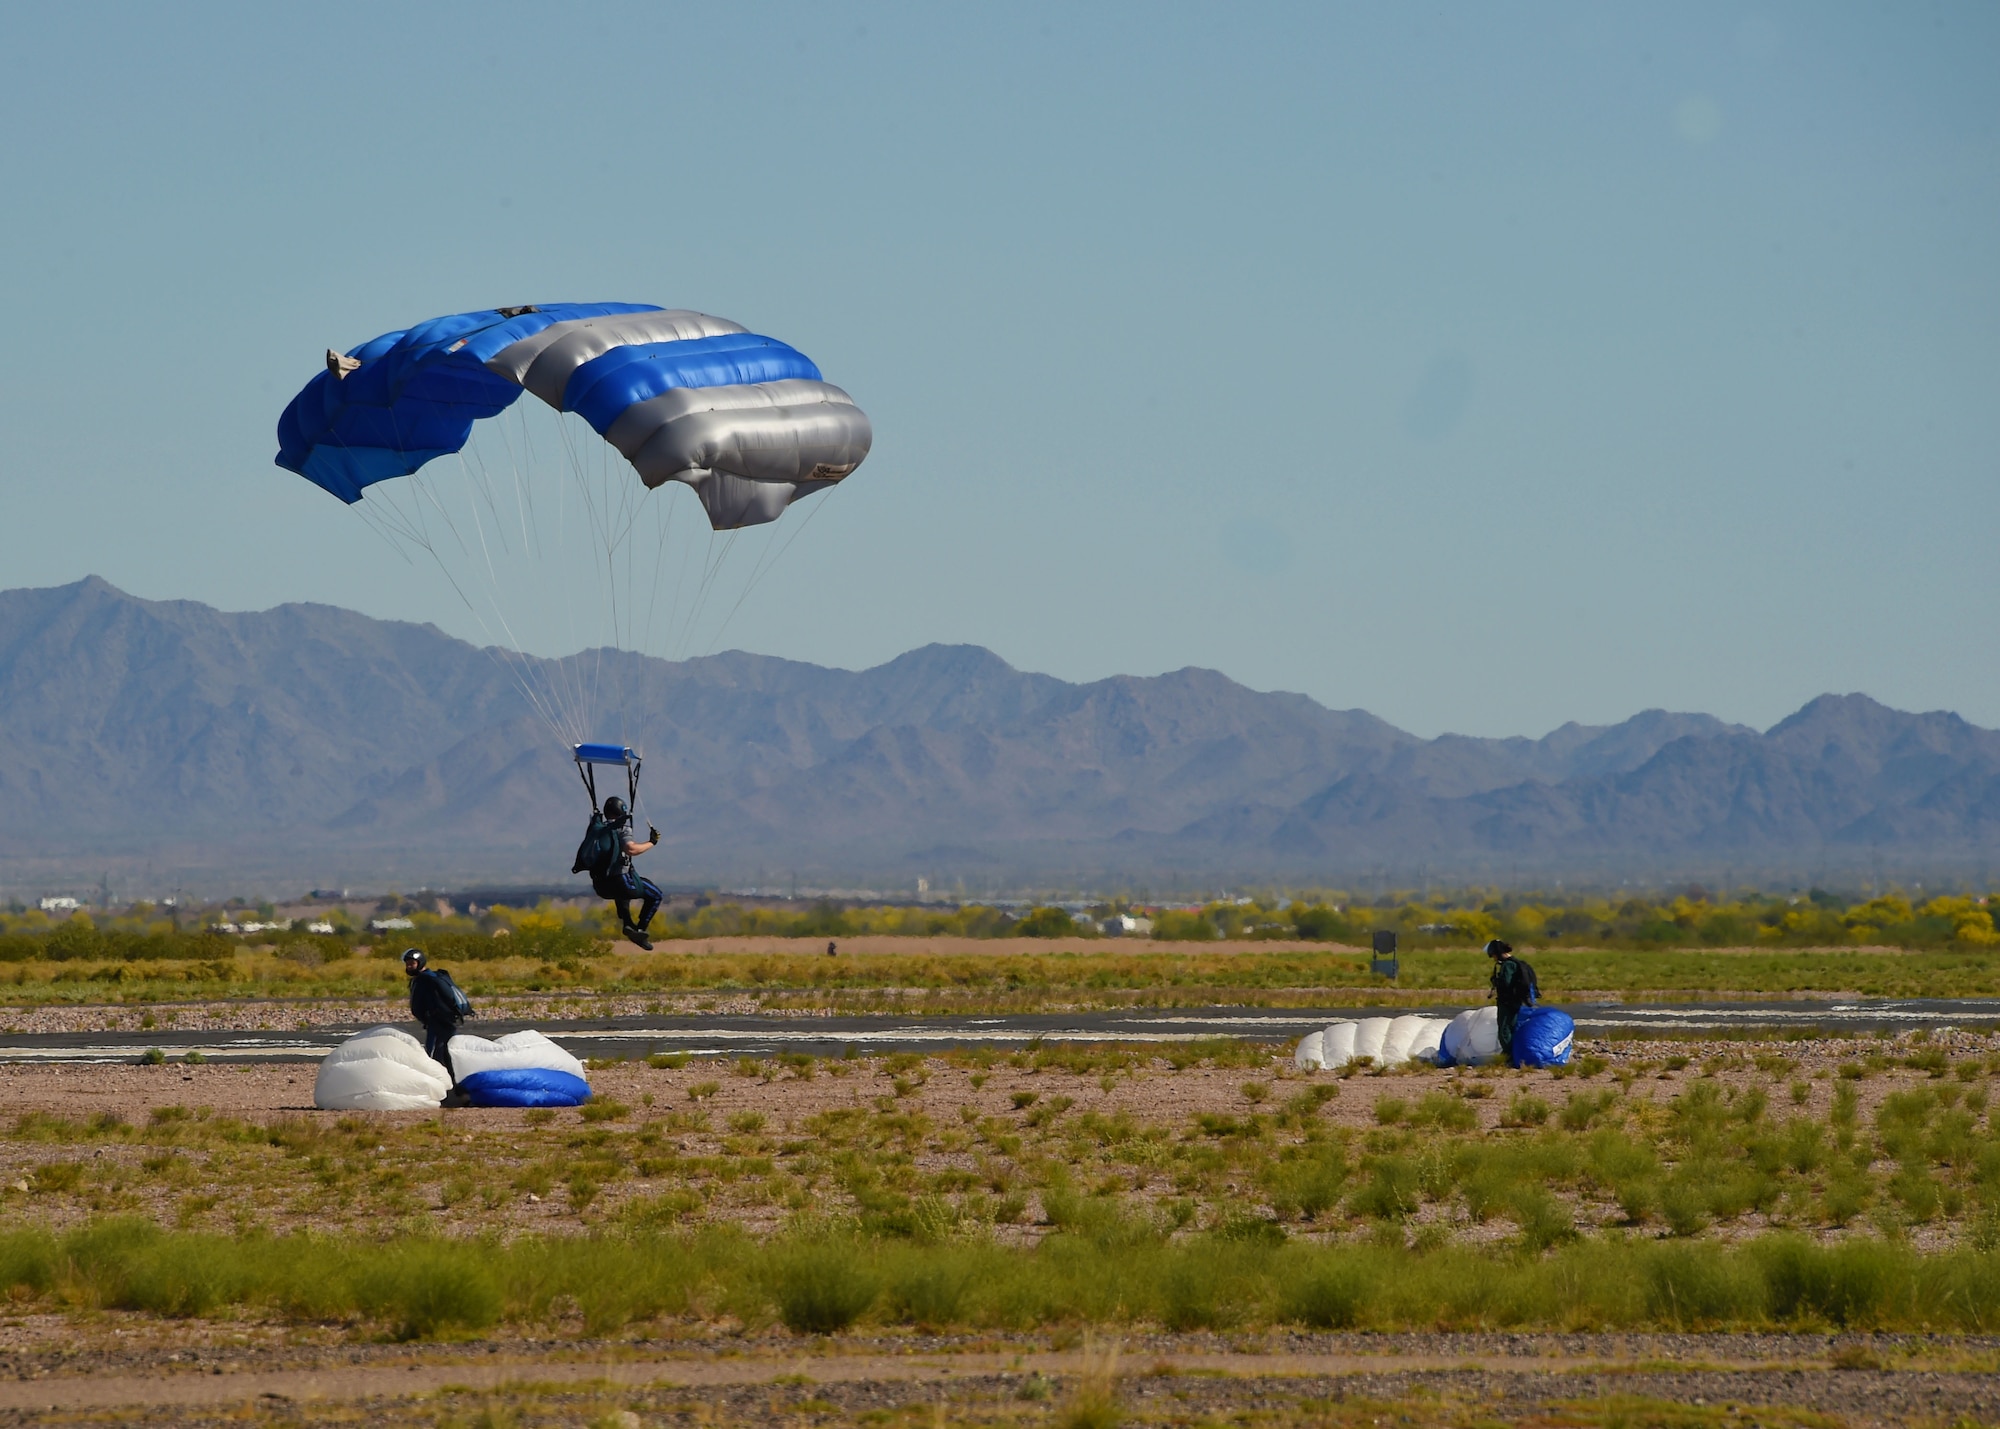 A cadet from the Wings of Blue Parachute Team prepares to land in a designated zone, March 29, 2017 at the Barry M. Goldwater Range in Gila Bend, Ariz. The Wings of Blue performs at Air Force events such as air shows and footballs games as well as select professional sporting events.  (U.S. Air Force photo by Airman 1st Class Caleb Worpel)